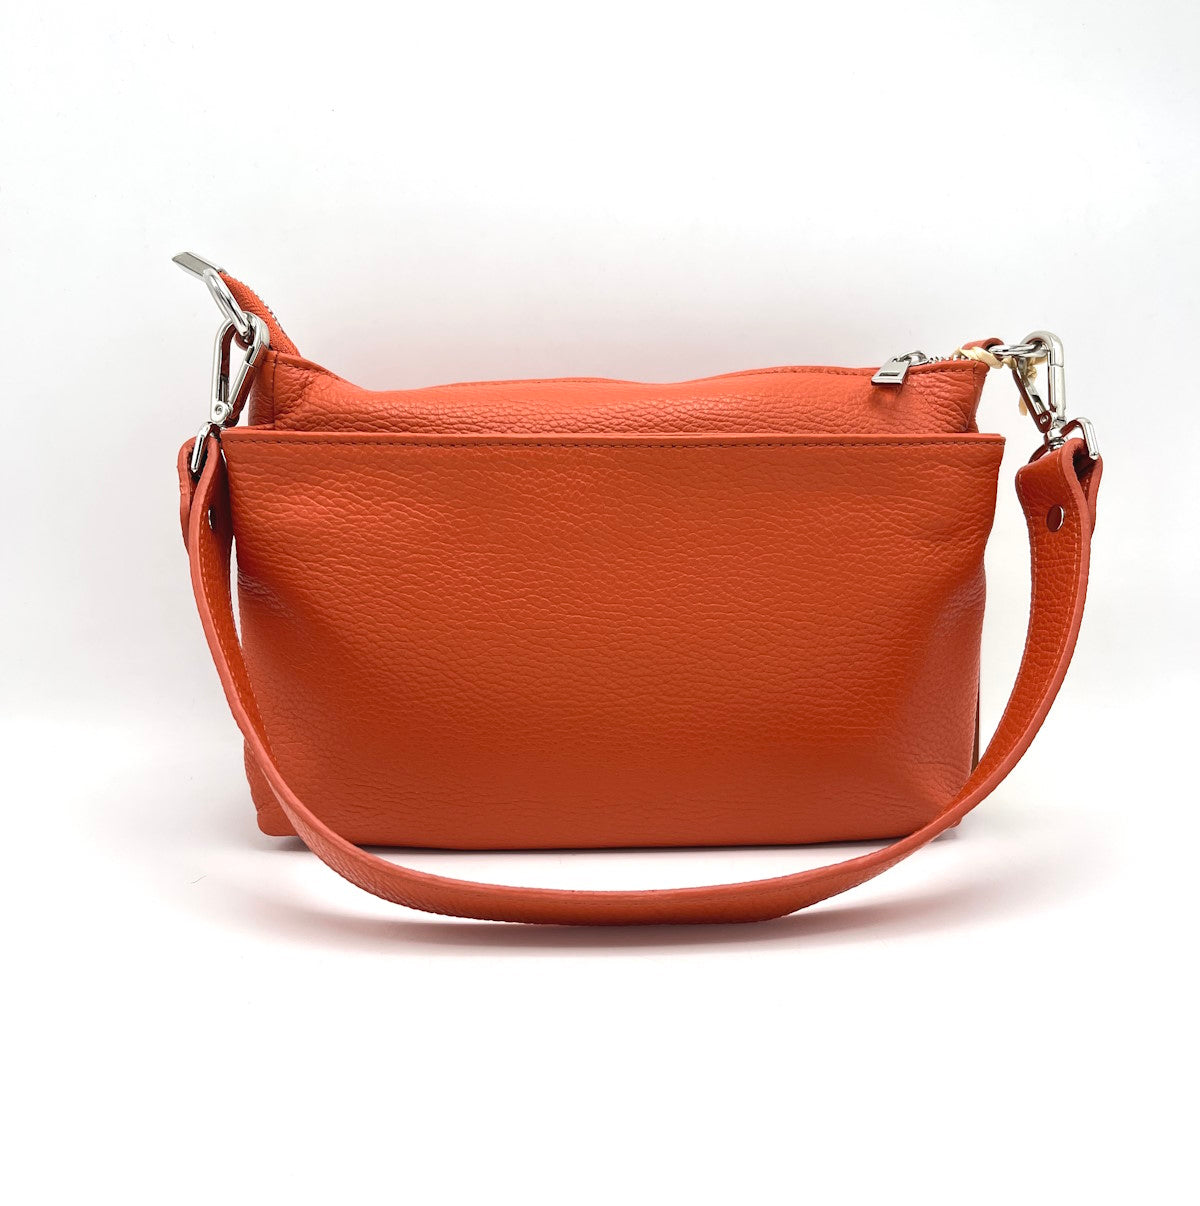 Genuine leather shoulder bag, for women, made in Italy, art. 112417.412